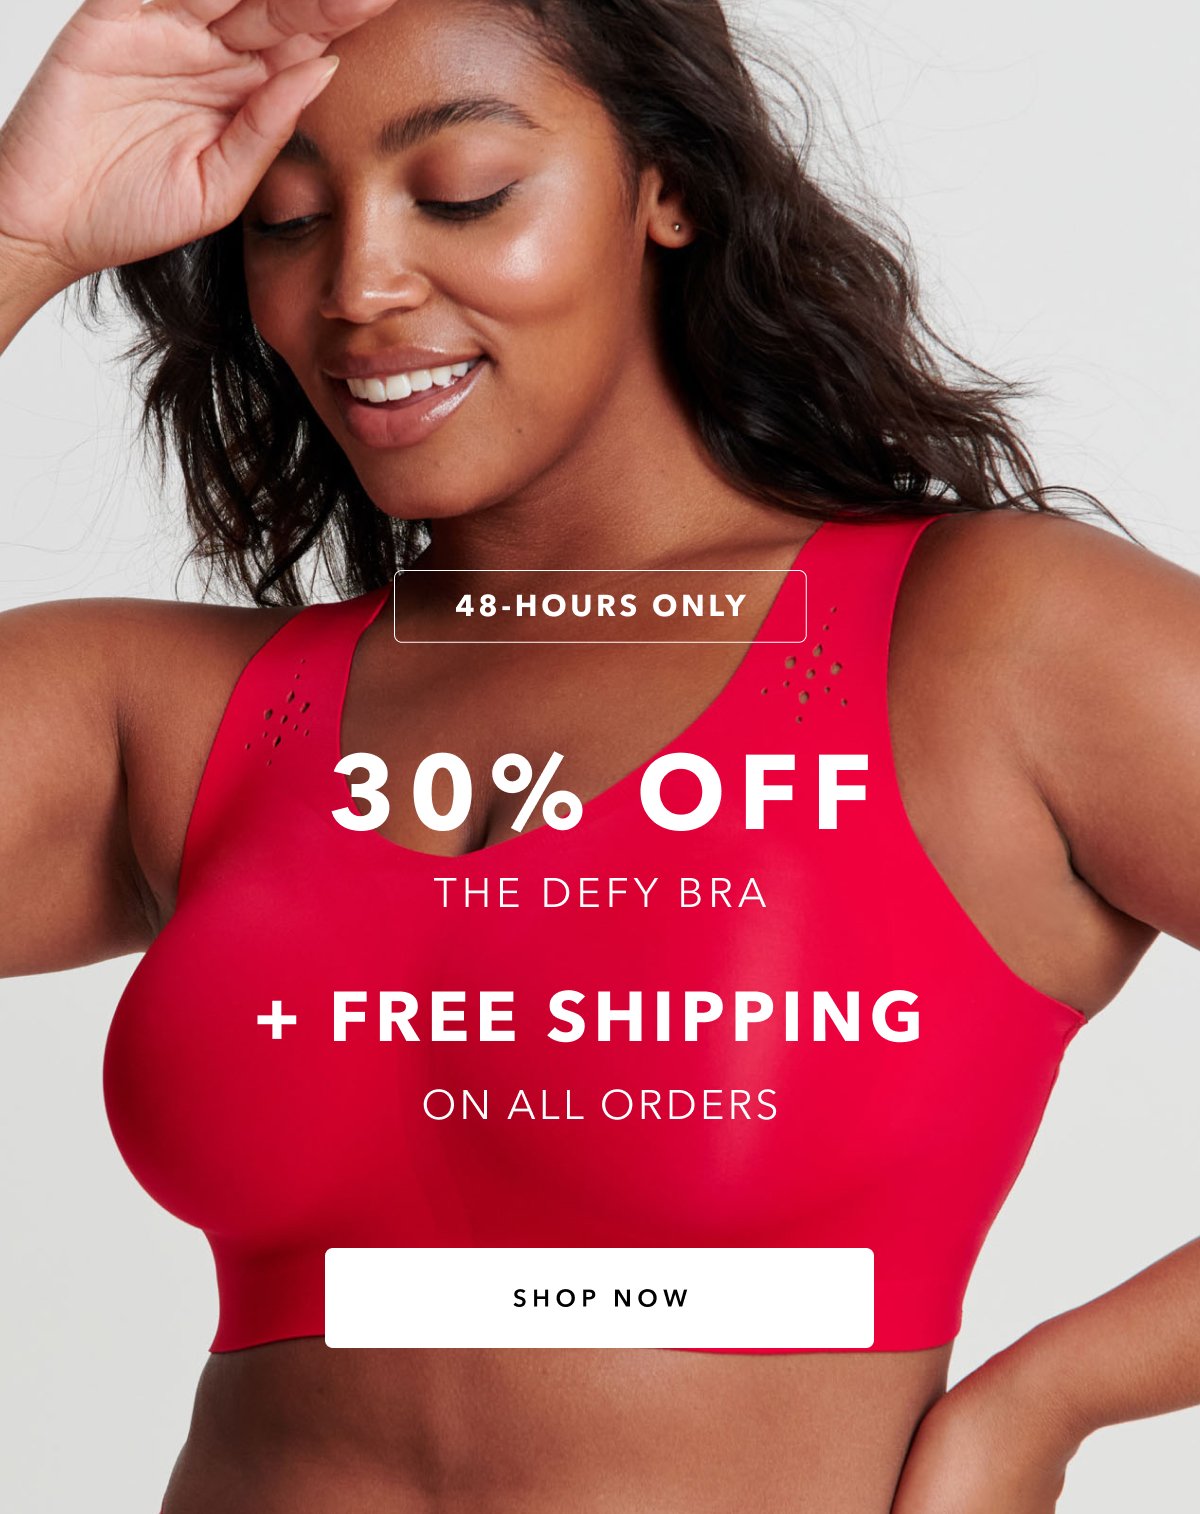 Evelyn & Bobbie: Free Shipping on All Orders + 30% OFF Defy